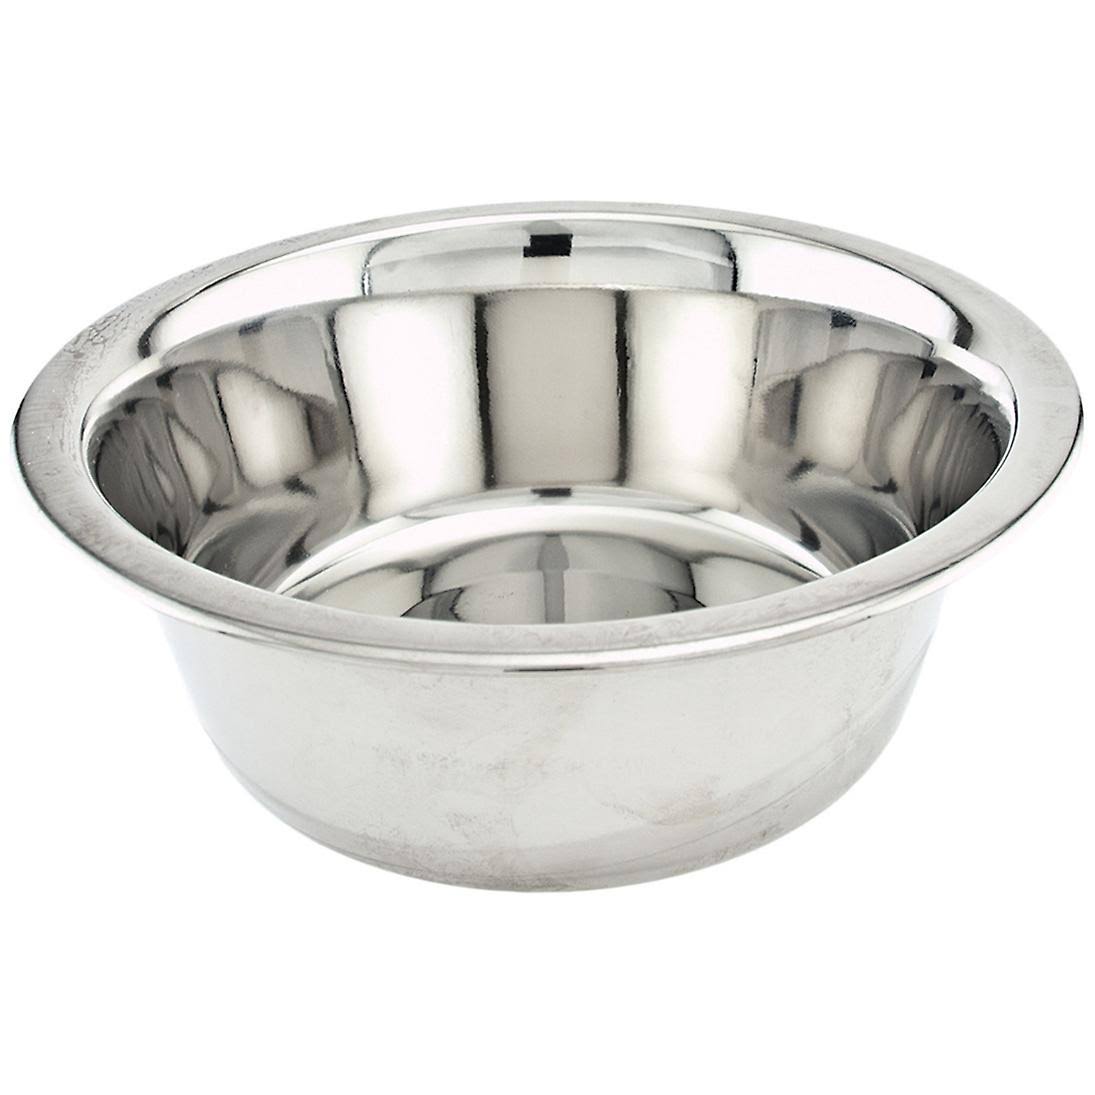 Westminster Pet Products Bowl - Stainless Steel, 3qt